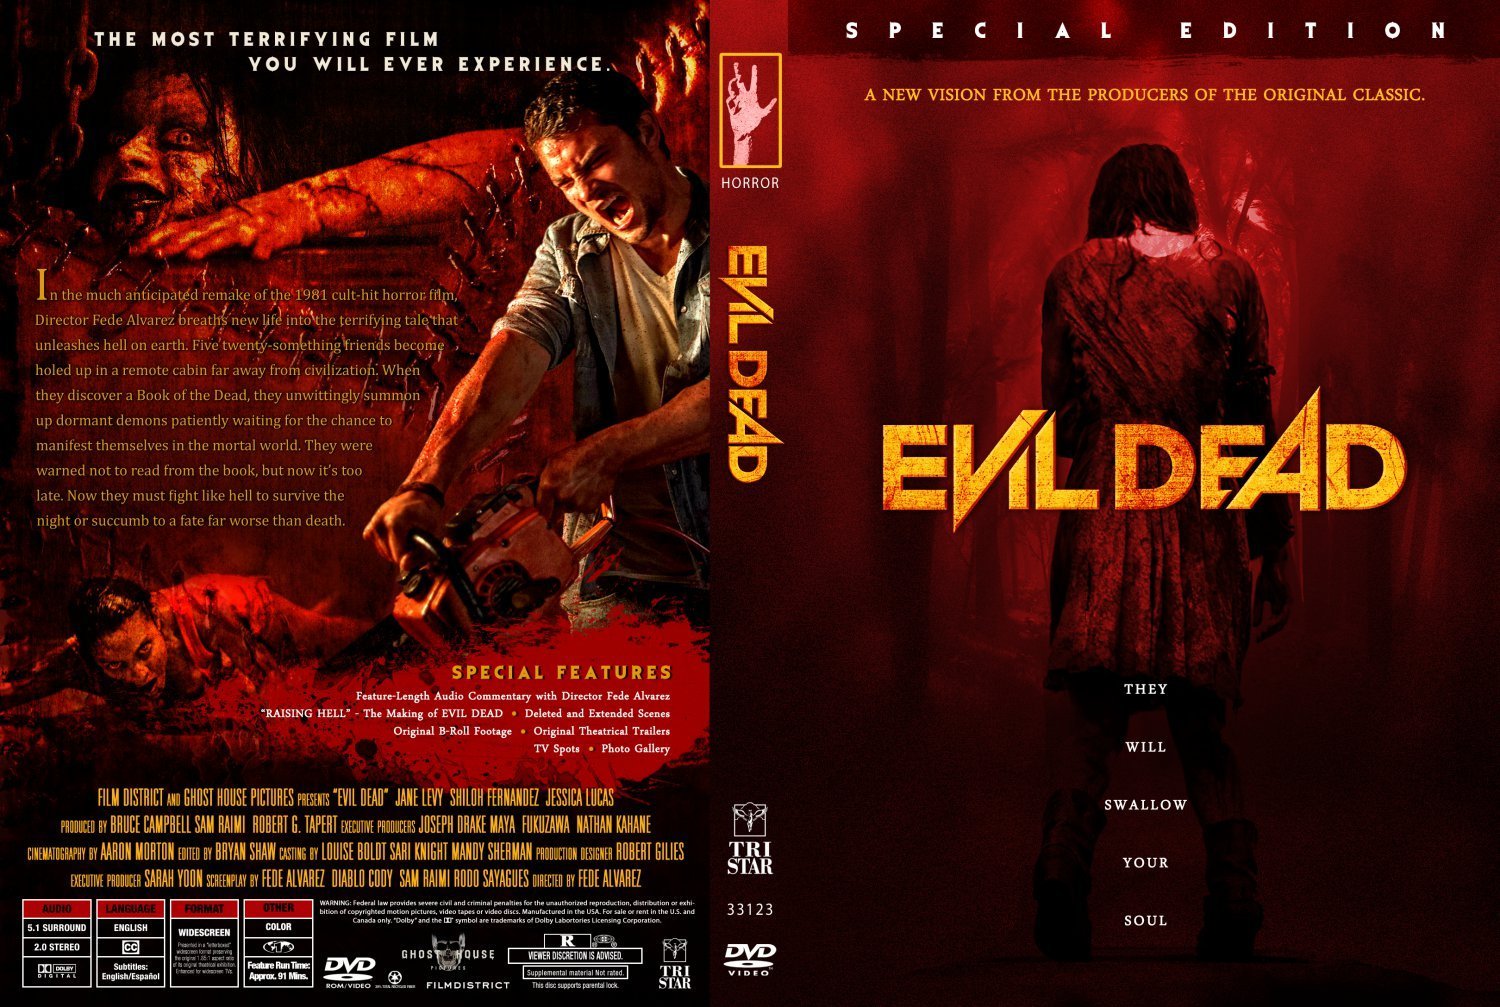 Evil dead 2013 movie free download in hindi mp4 free